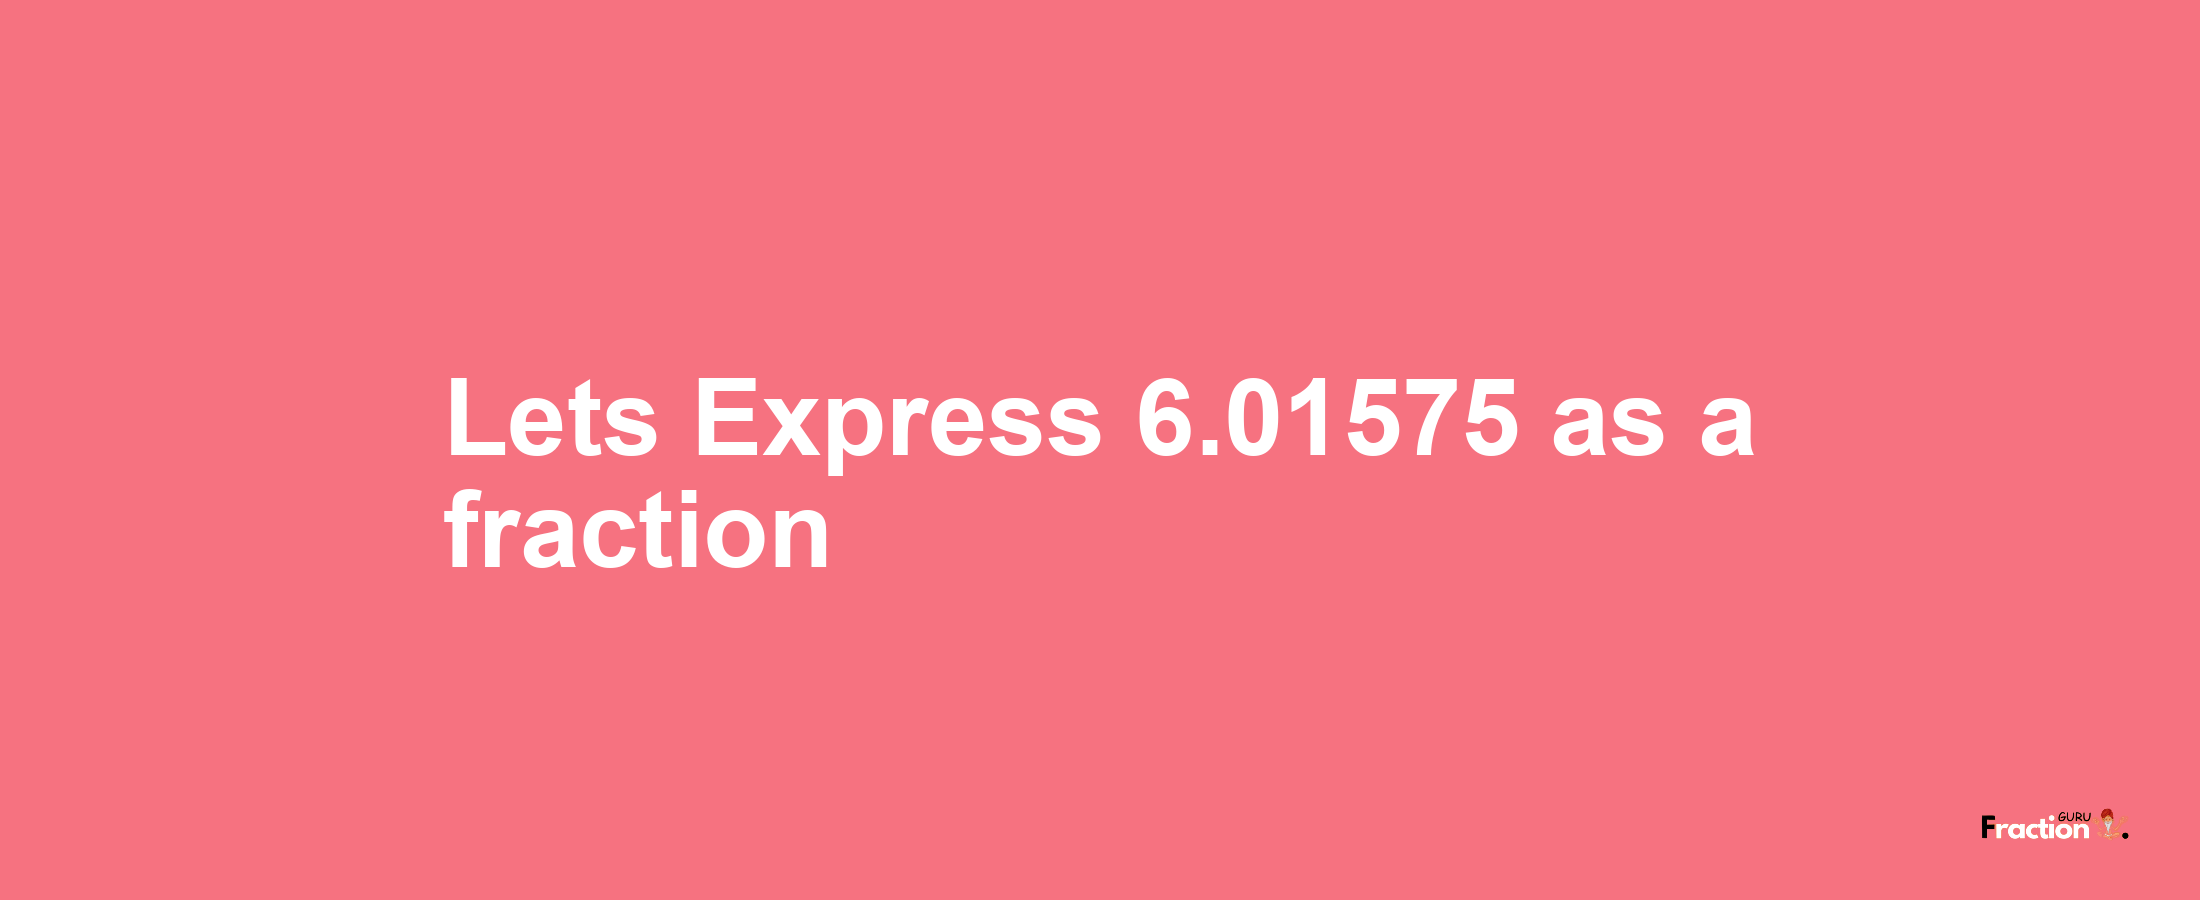 Lets Express 6.01575 as afraction